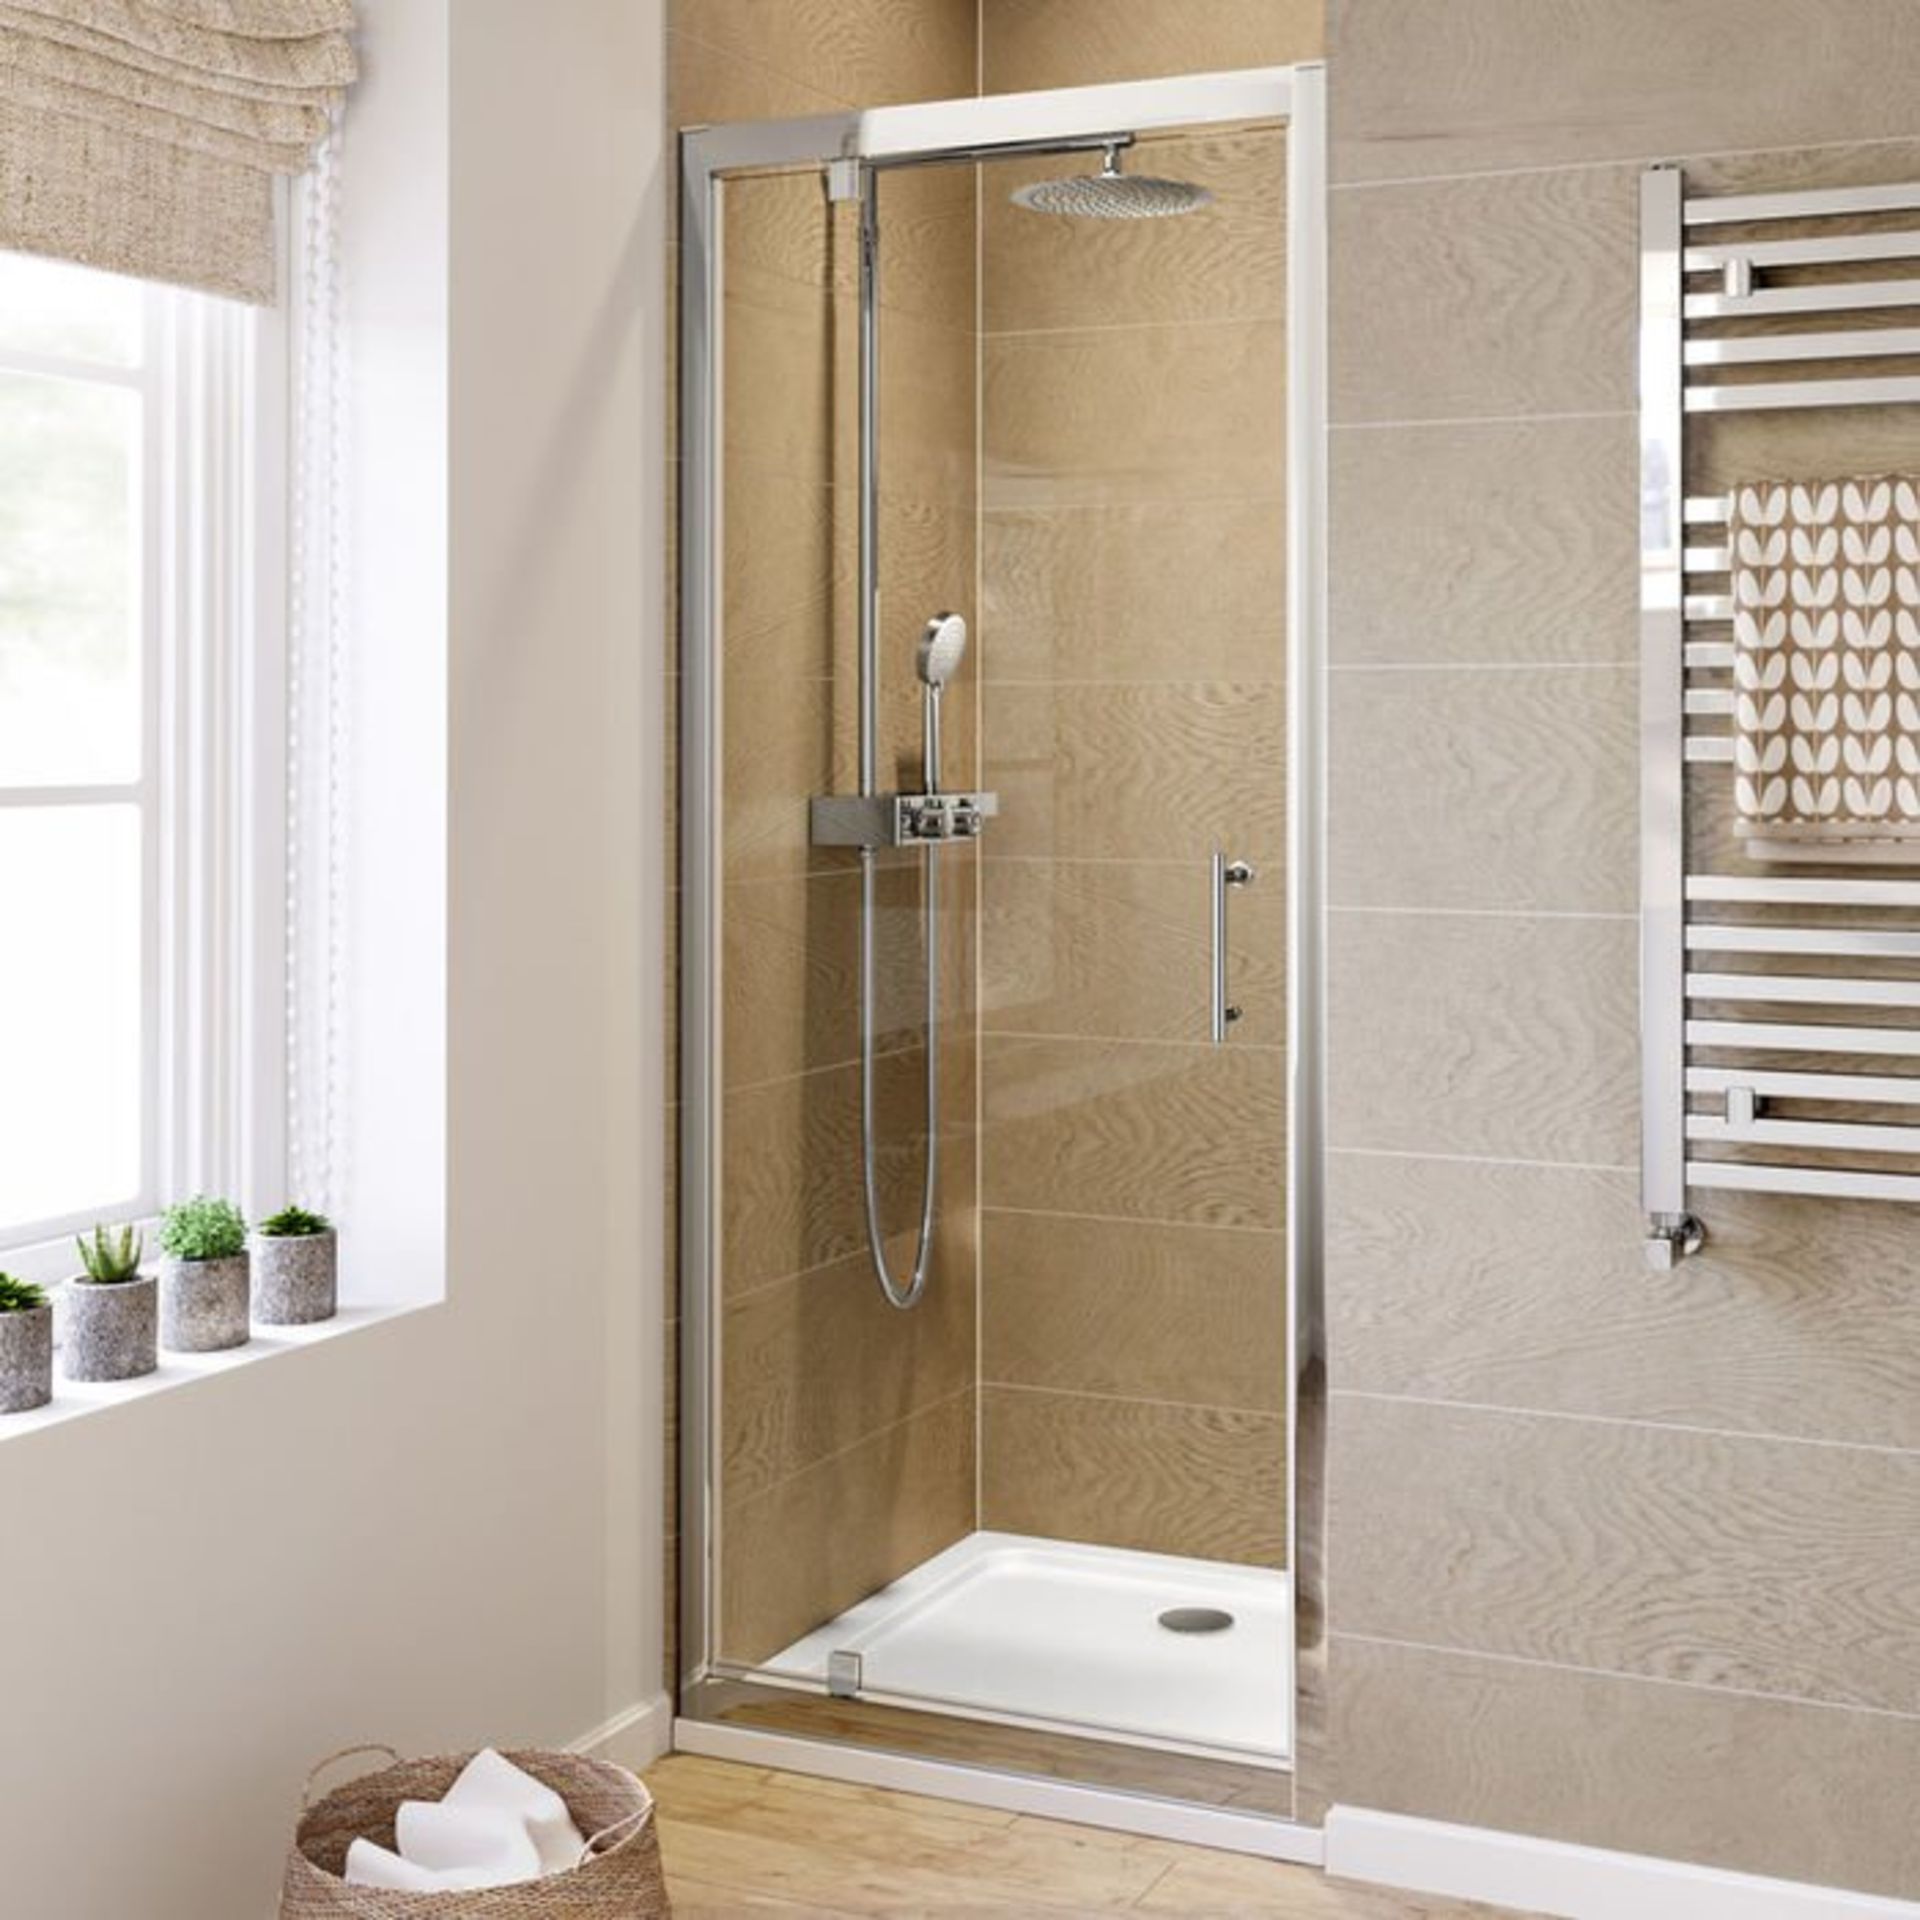 (V118) 800mm - 6mm - Elements Pivot Shower Door. RRP £299.99. 6mm Safety Glass Fully waterproof - Image 2 of 3